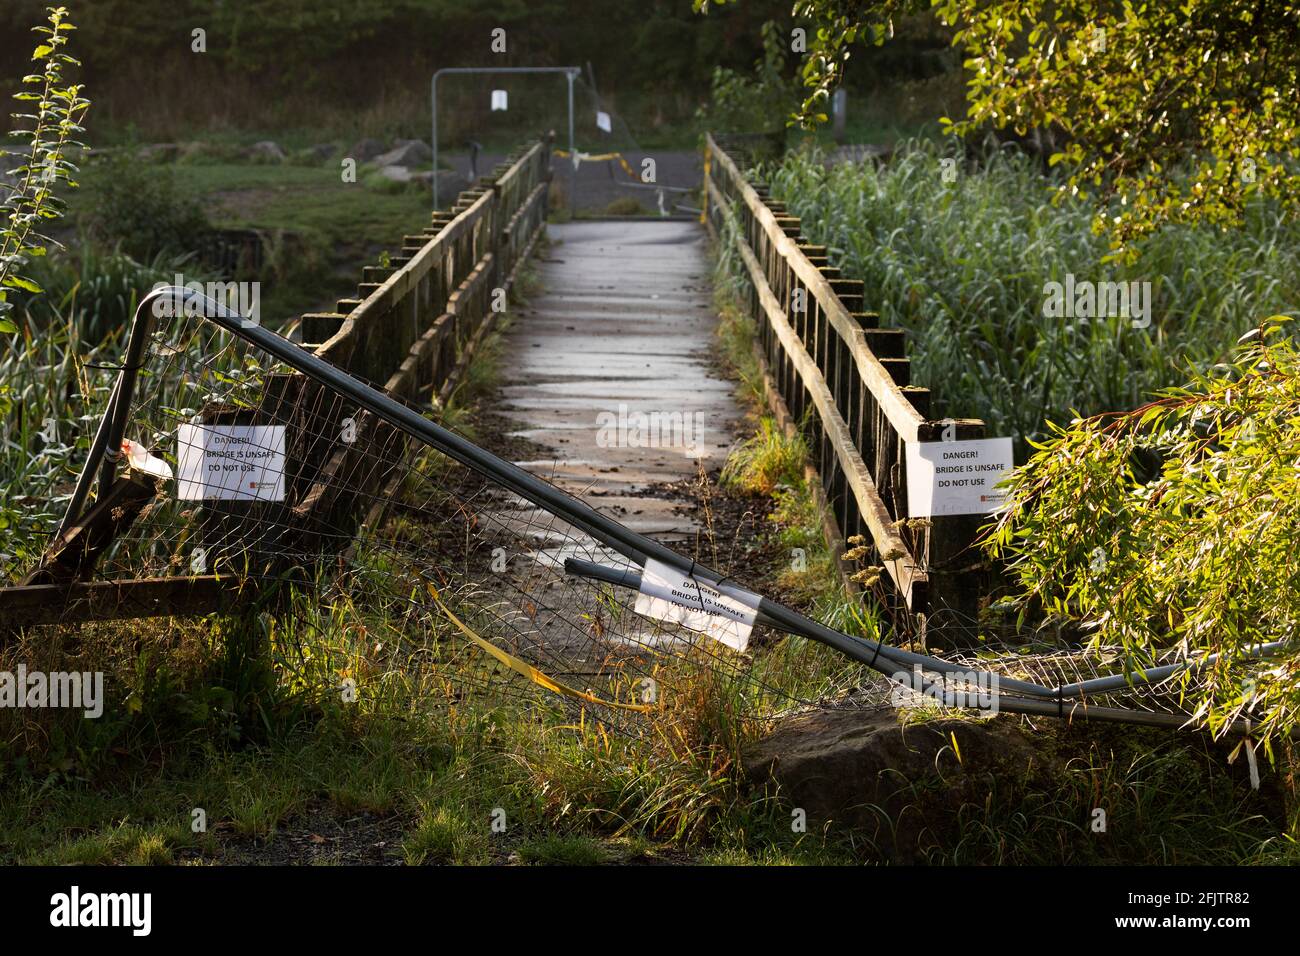 Damaged fencing by a bridge at Watergate Country Park in Gateshead, England. The fence was been vandalised. Stock Photo